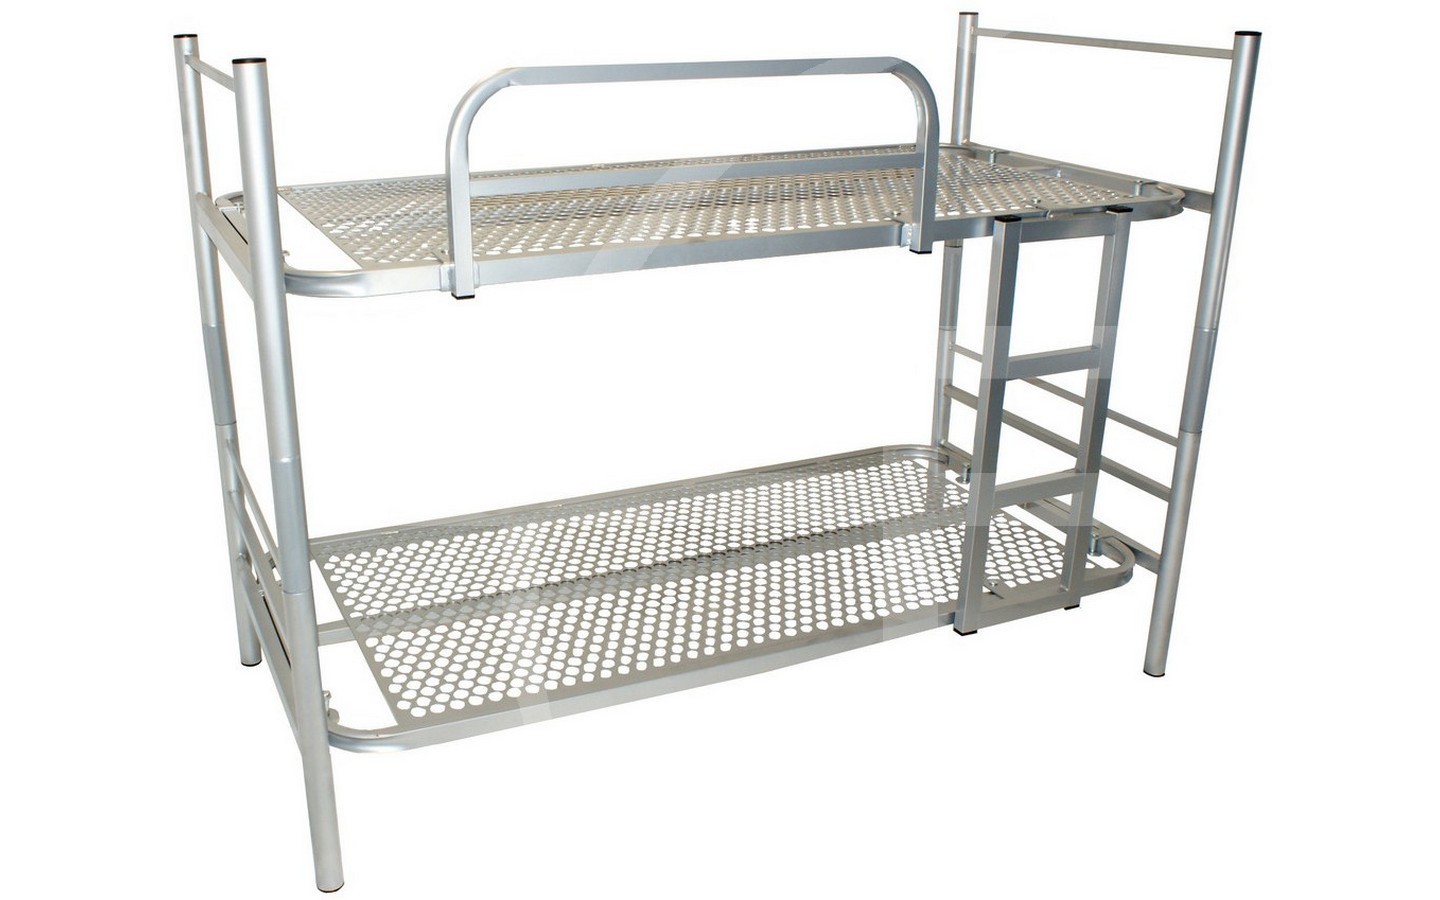 Bunk Beds For S Steel, Used Military Bunk Beds